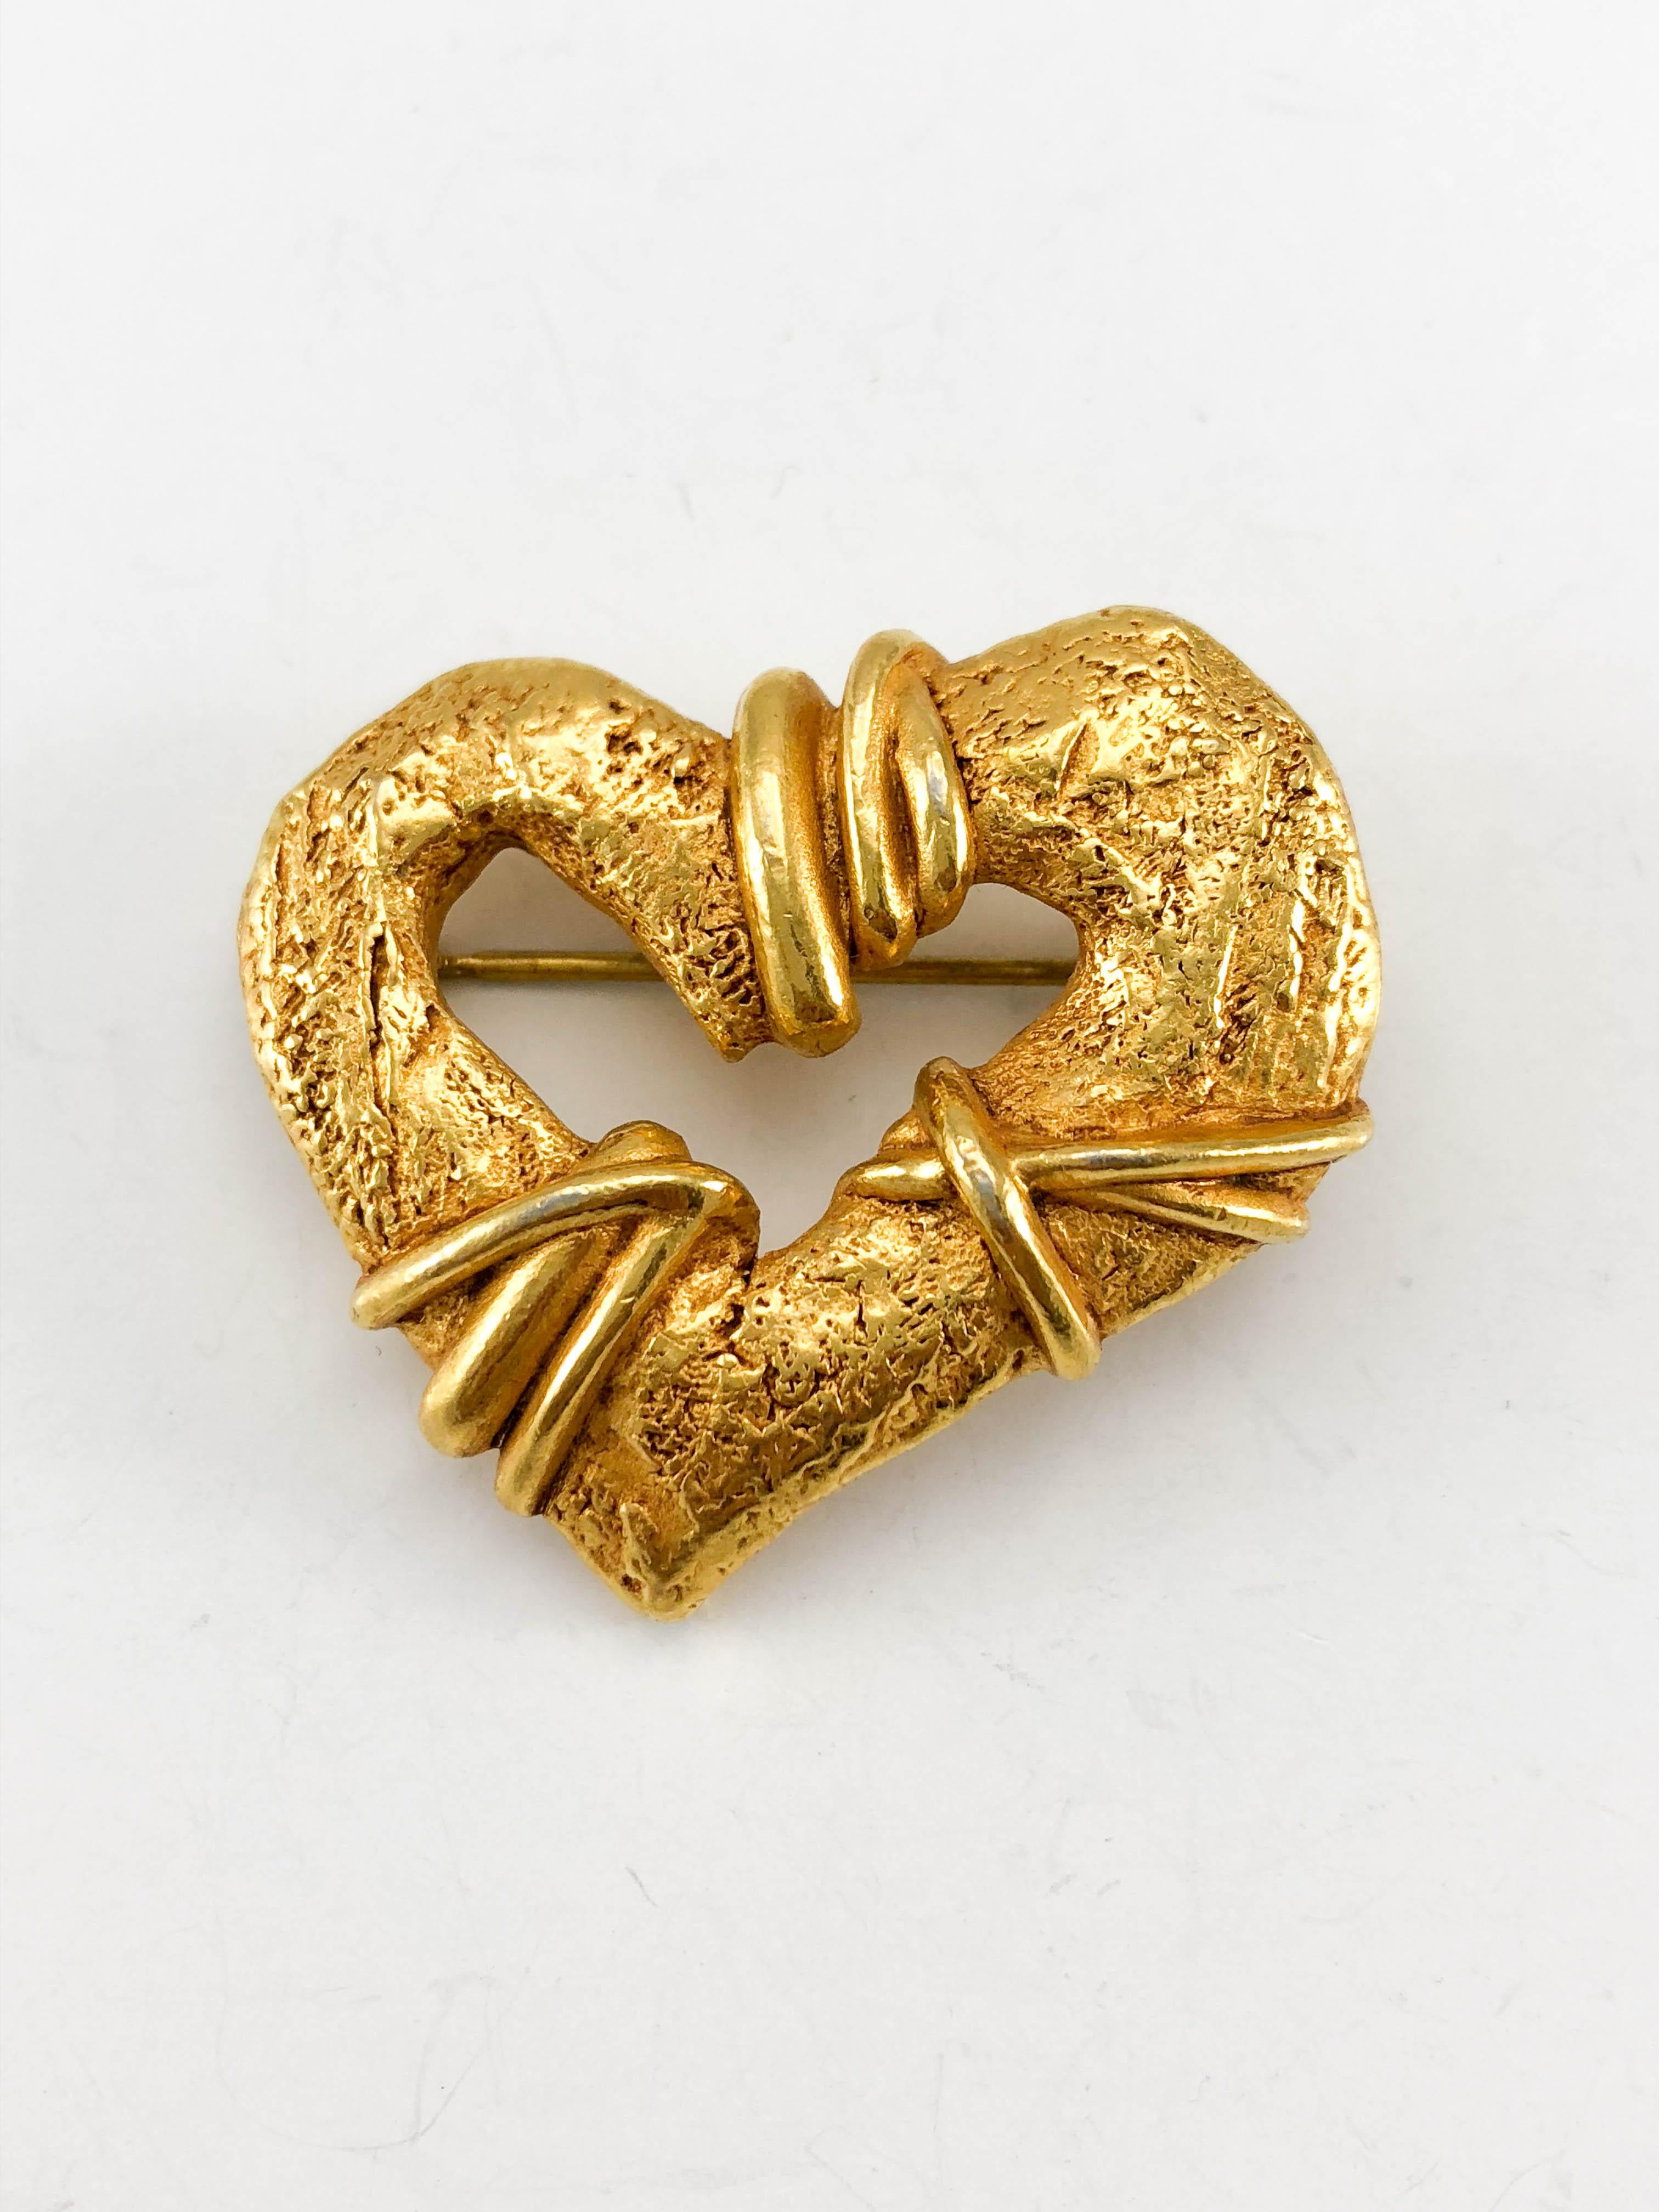 1994 Christian Lacroix Gold-Plated Heart Brooch, by Robert Goossens For Sale 3